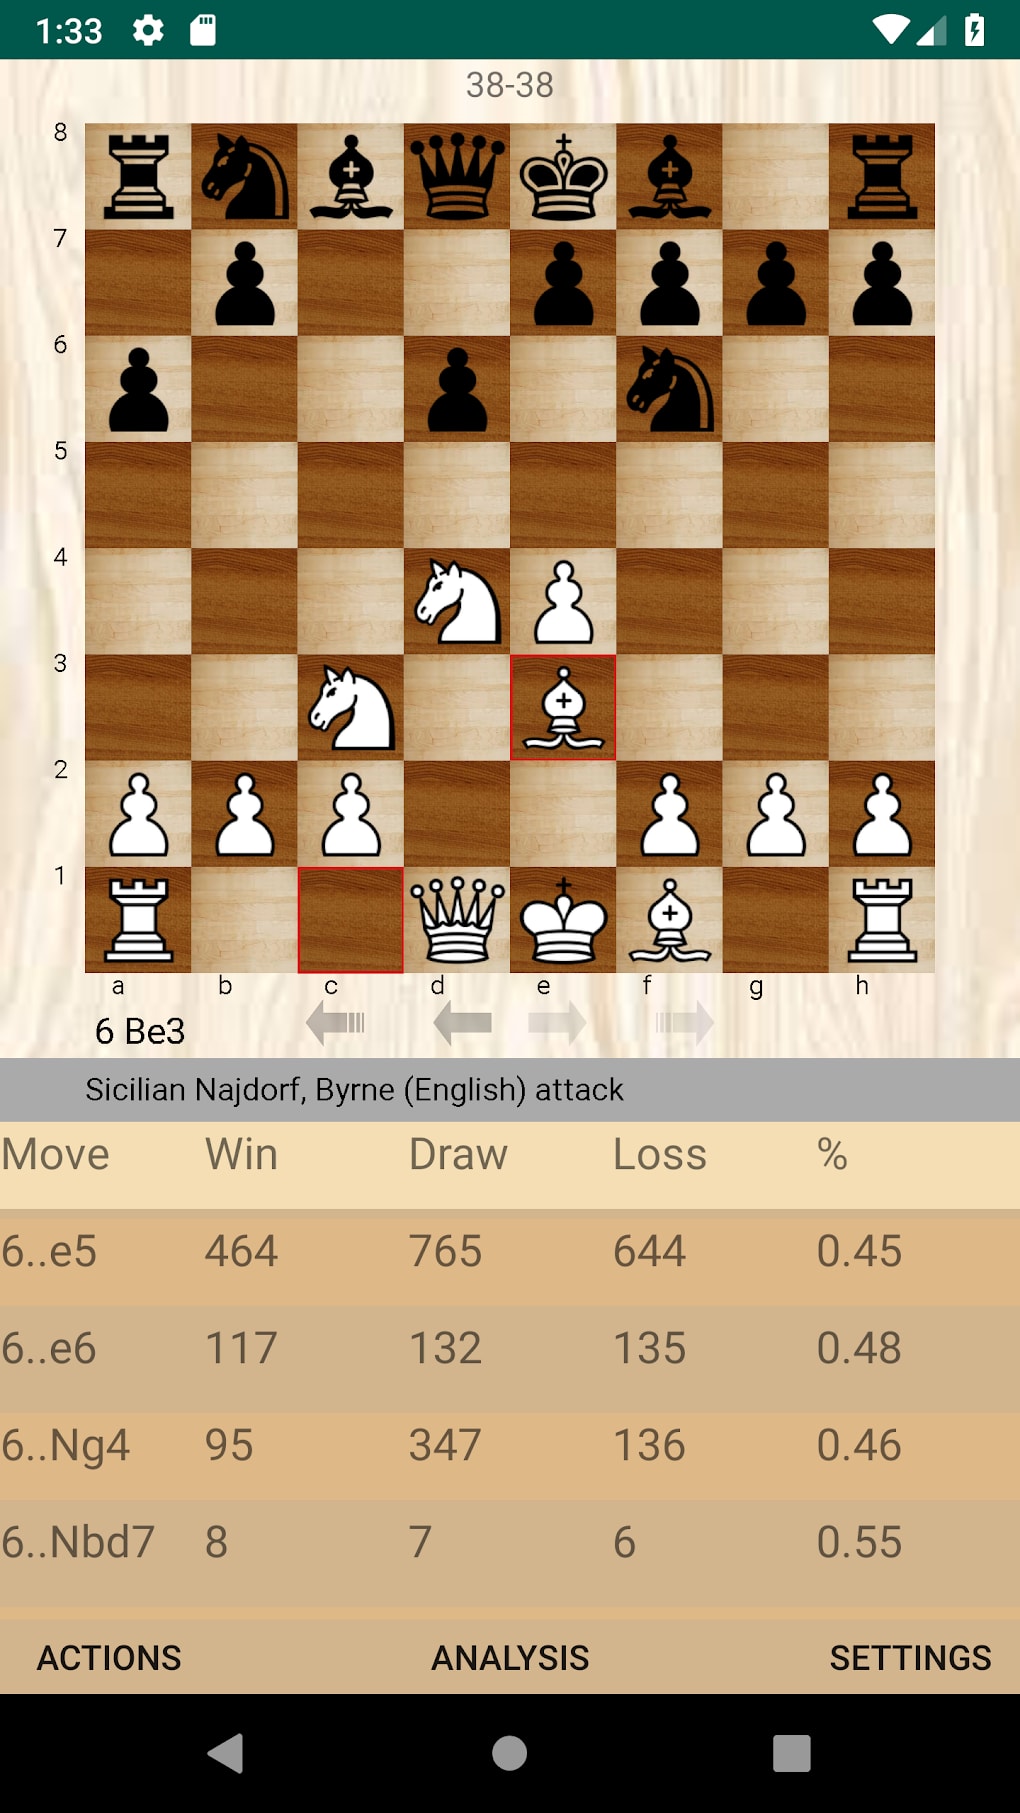 Chess Openings for Android - Download